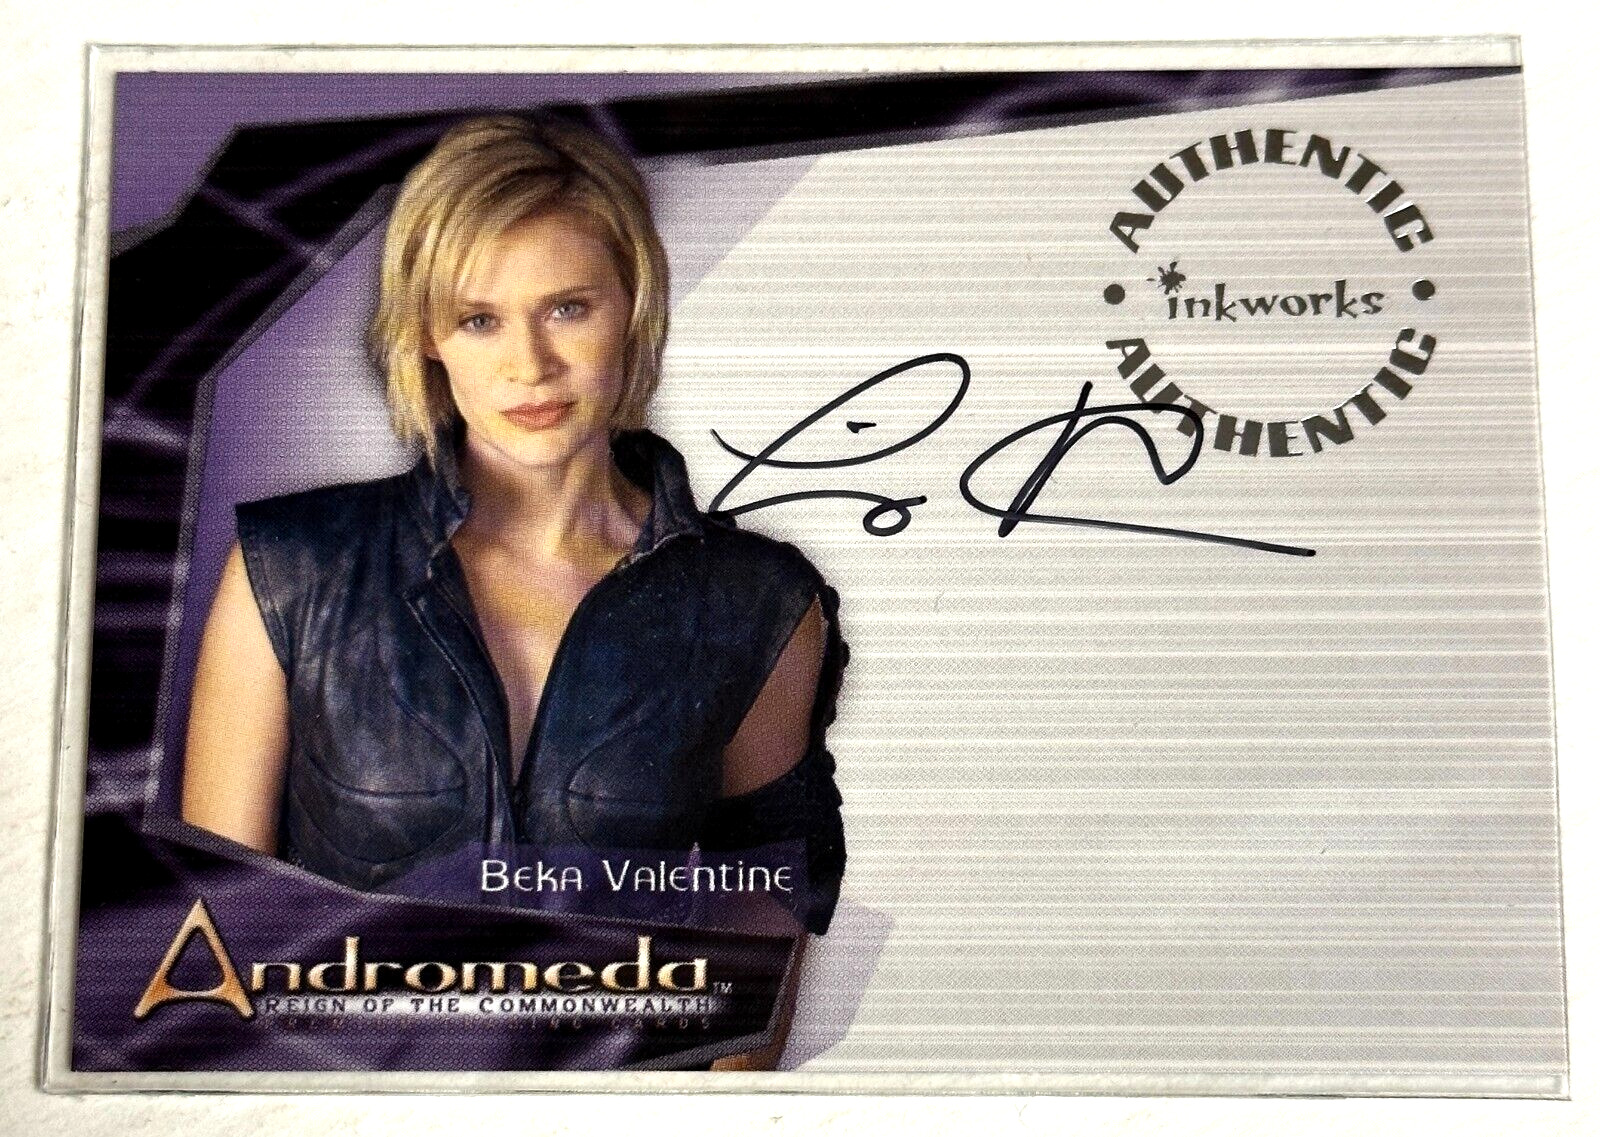 2004 Andromeda: Reign of the Commonwealth Autograph Card Signed by Lisa Ryder